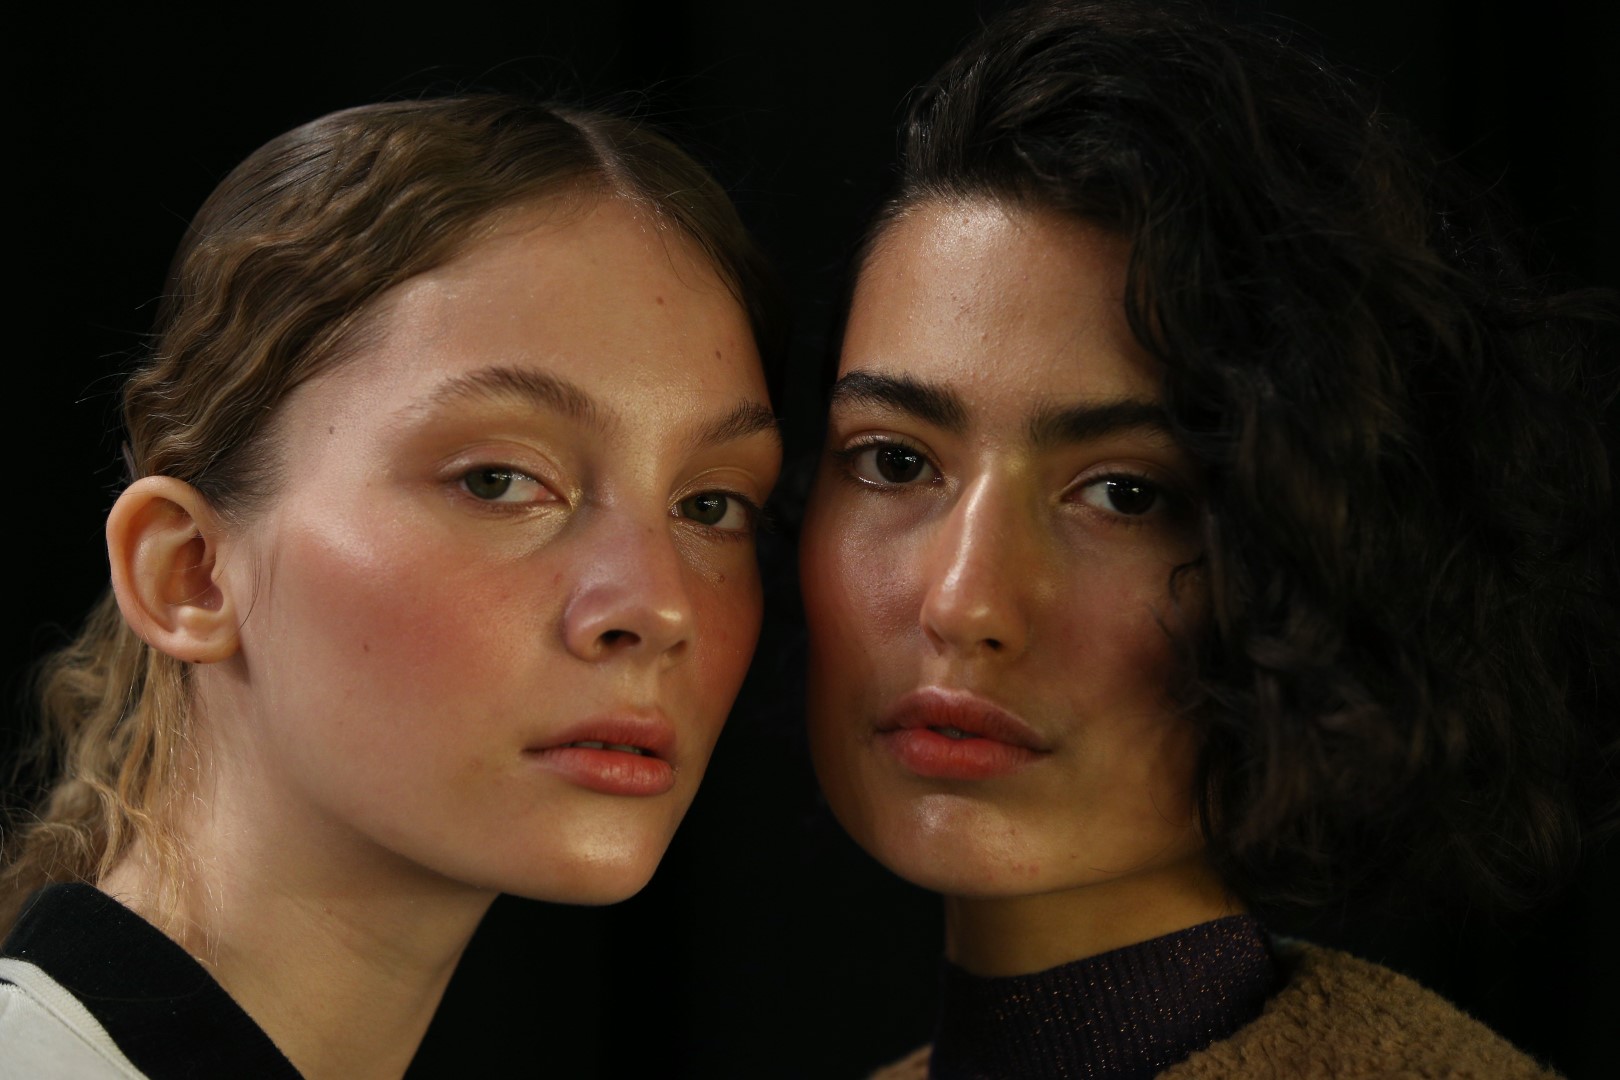 SYDNEY, AUSTRALIA - MAY 15: Models pose backstage ahead of the Karla Spetic show at Mercedes-Benz Fashion Week Resort 20 Collections at Carriageworks on May 15, 2019 in Sydney, Australia. (Photo by Lisa Maree Williams/Getty Images)